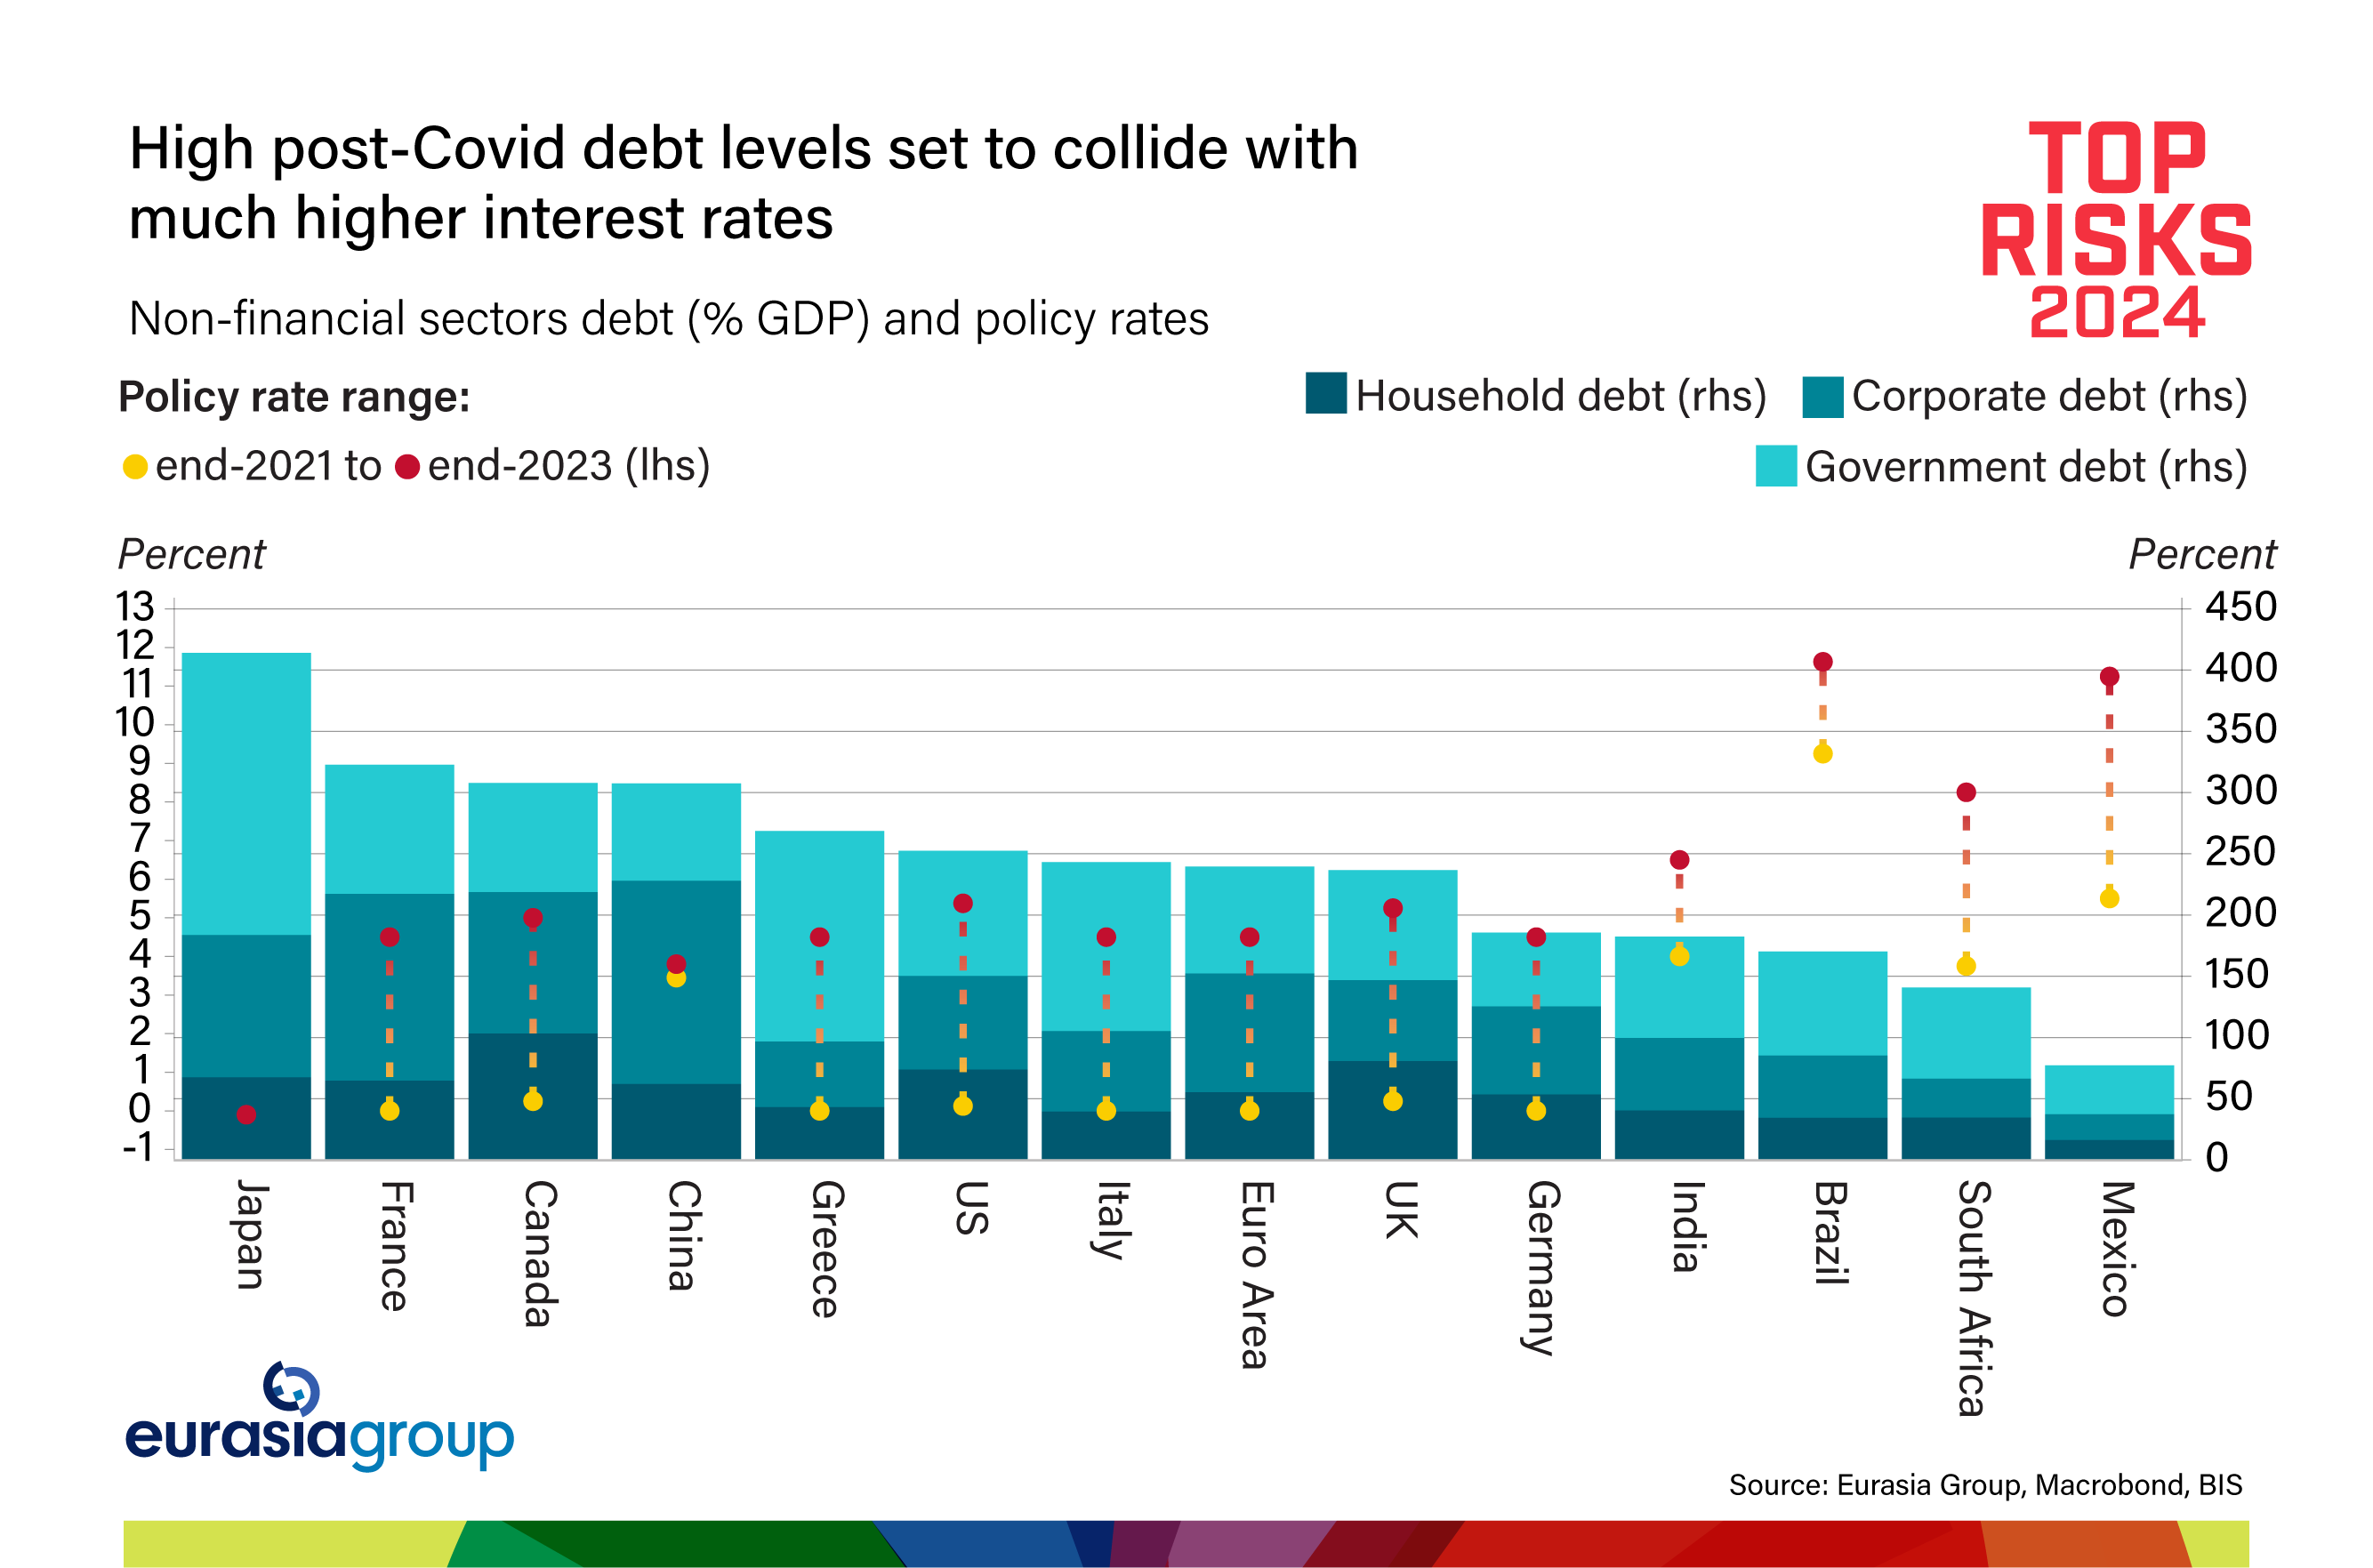 High post-Covid debt levels set to collide with much higher interest rates